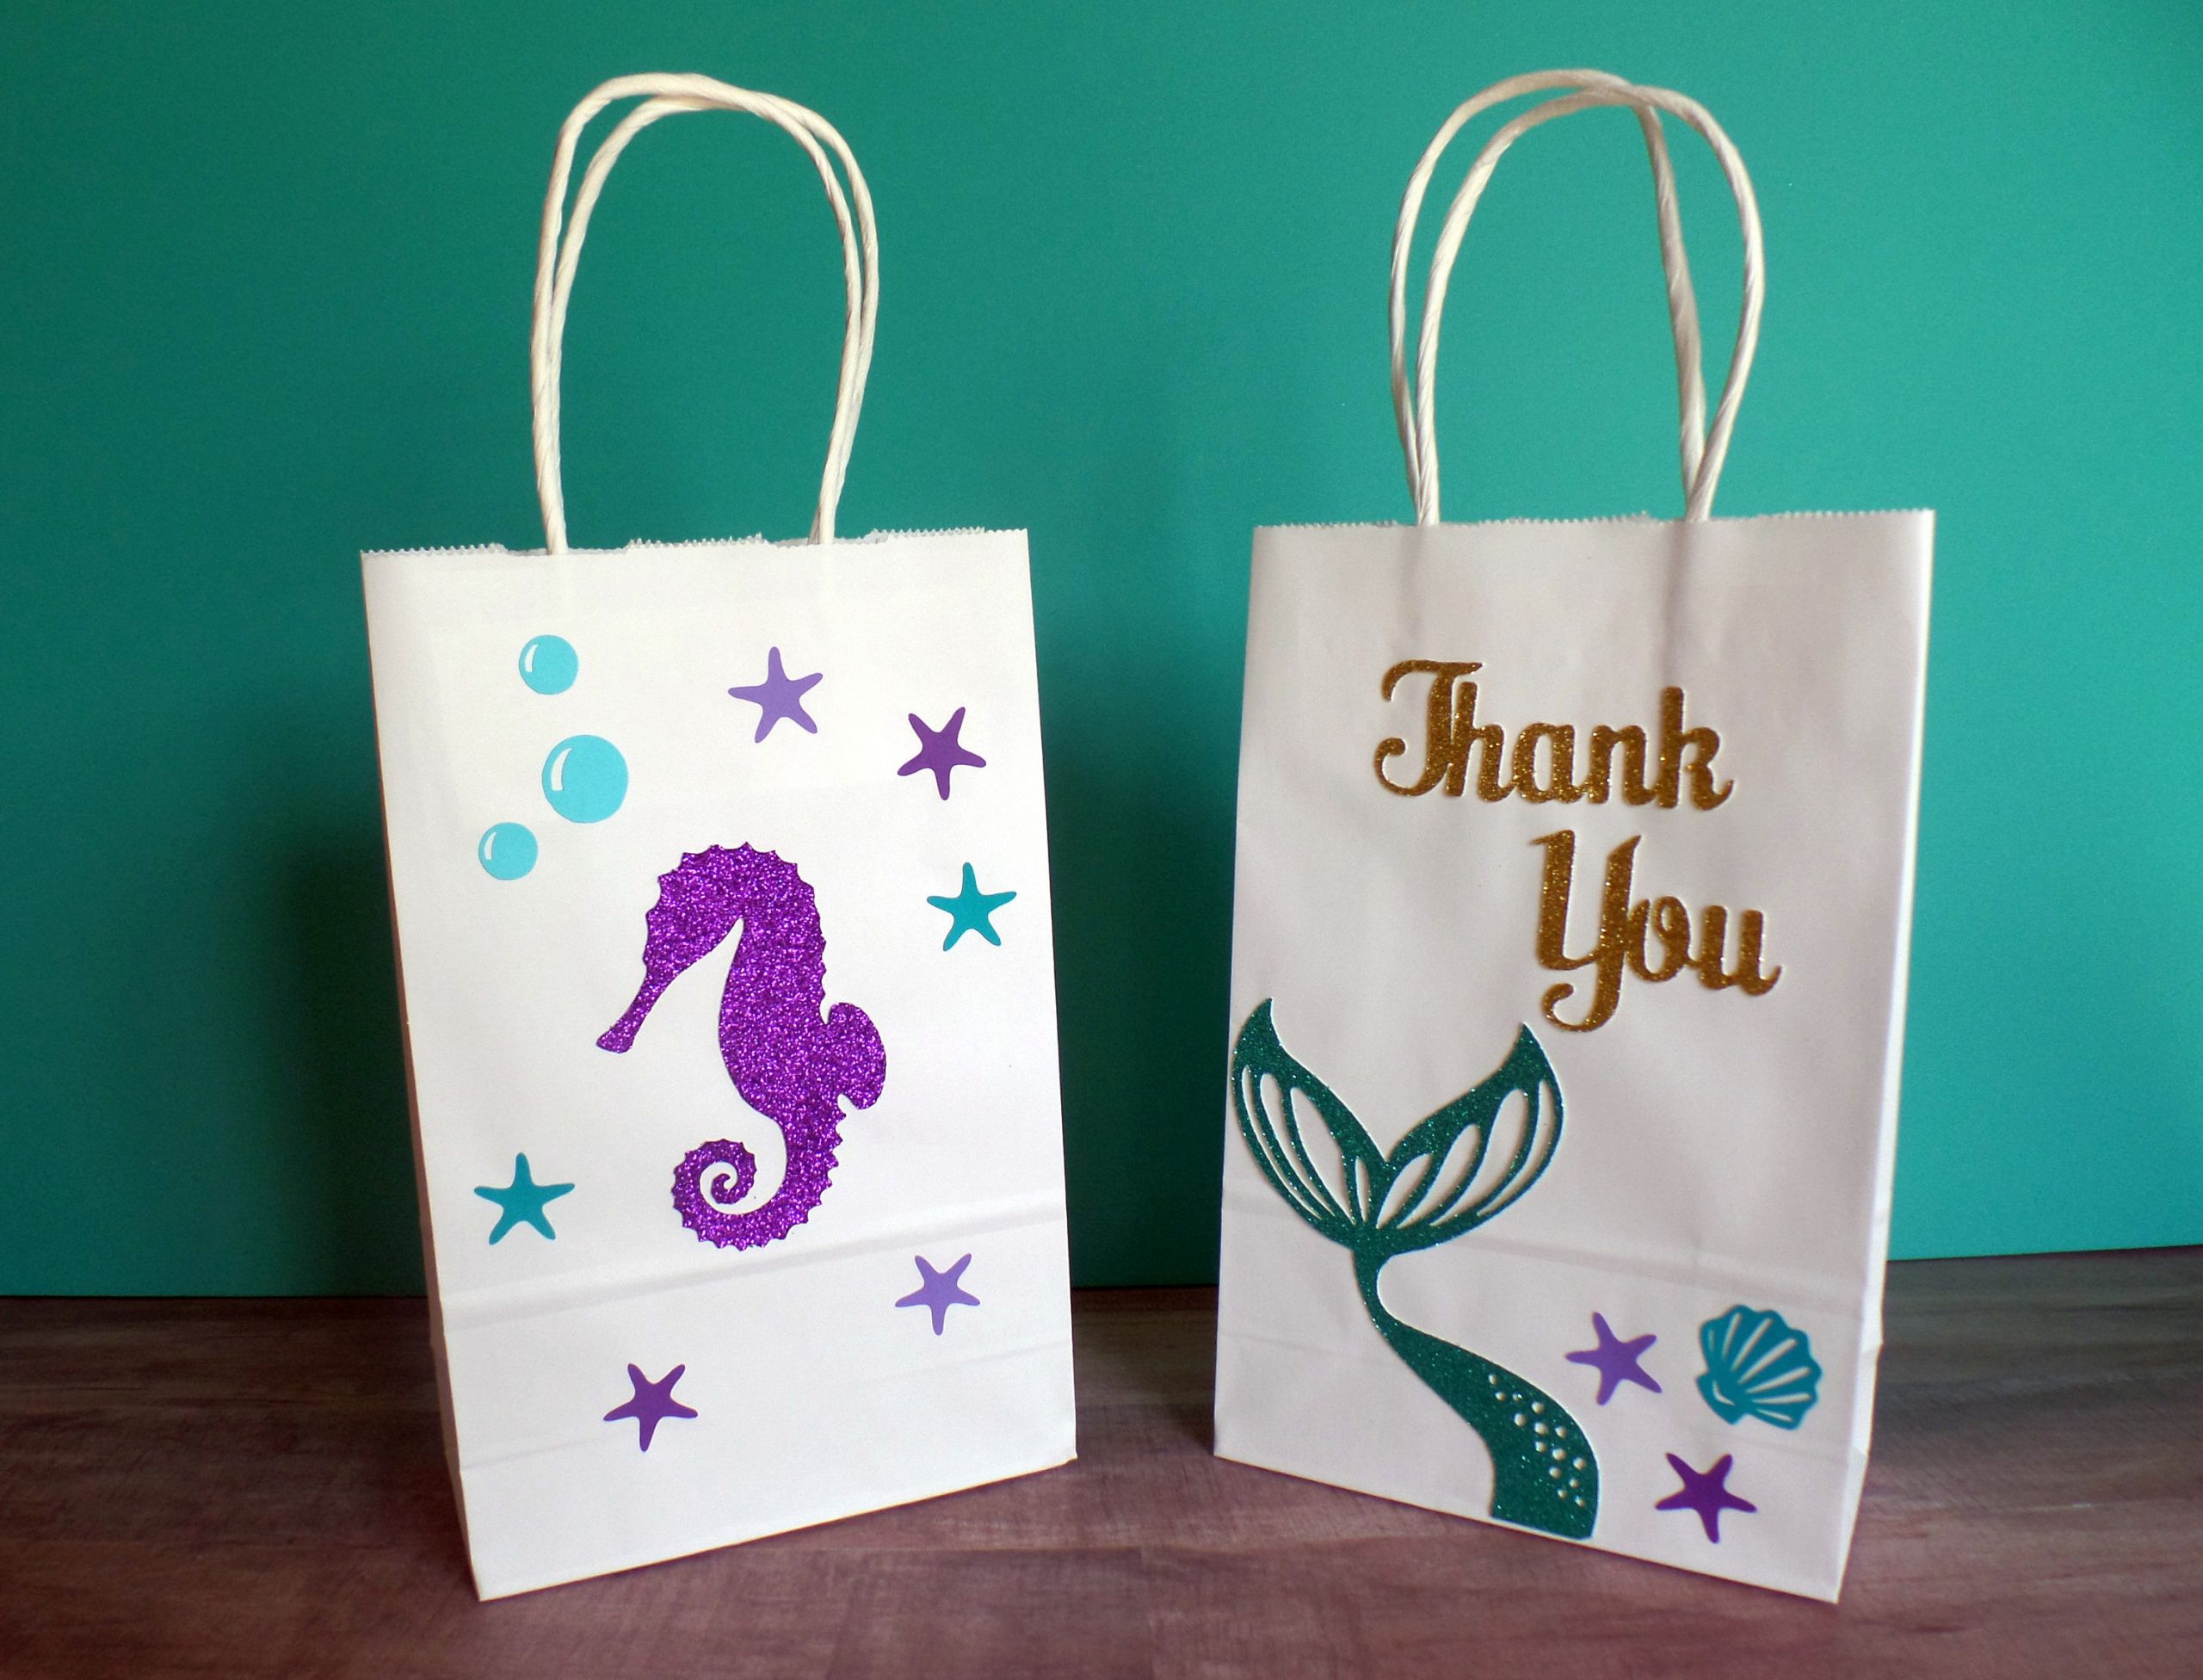 Mermaid Party Bag Ideas
 Under the Sea Party Favor Bags Gift Bags Mermaid Party